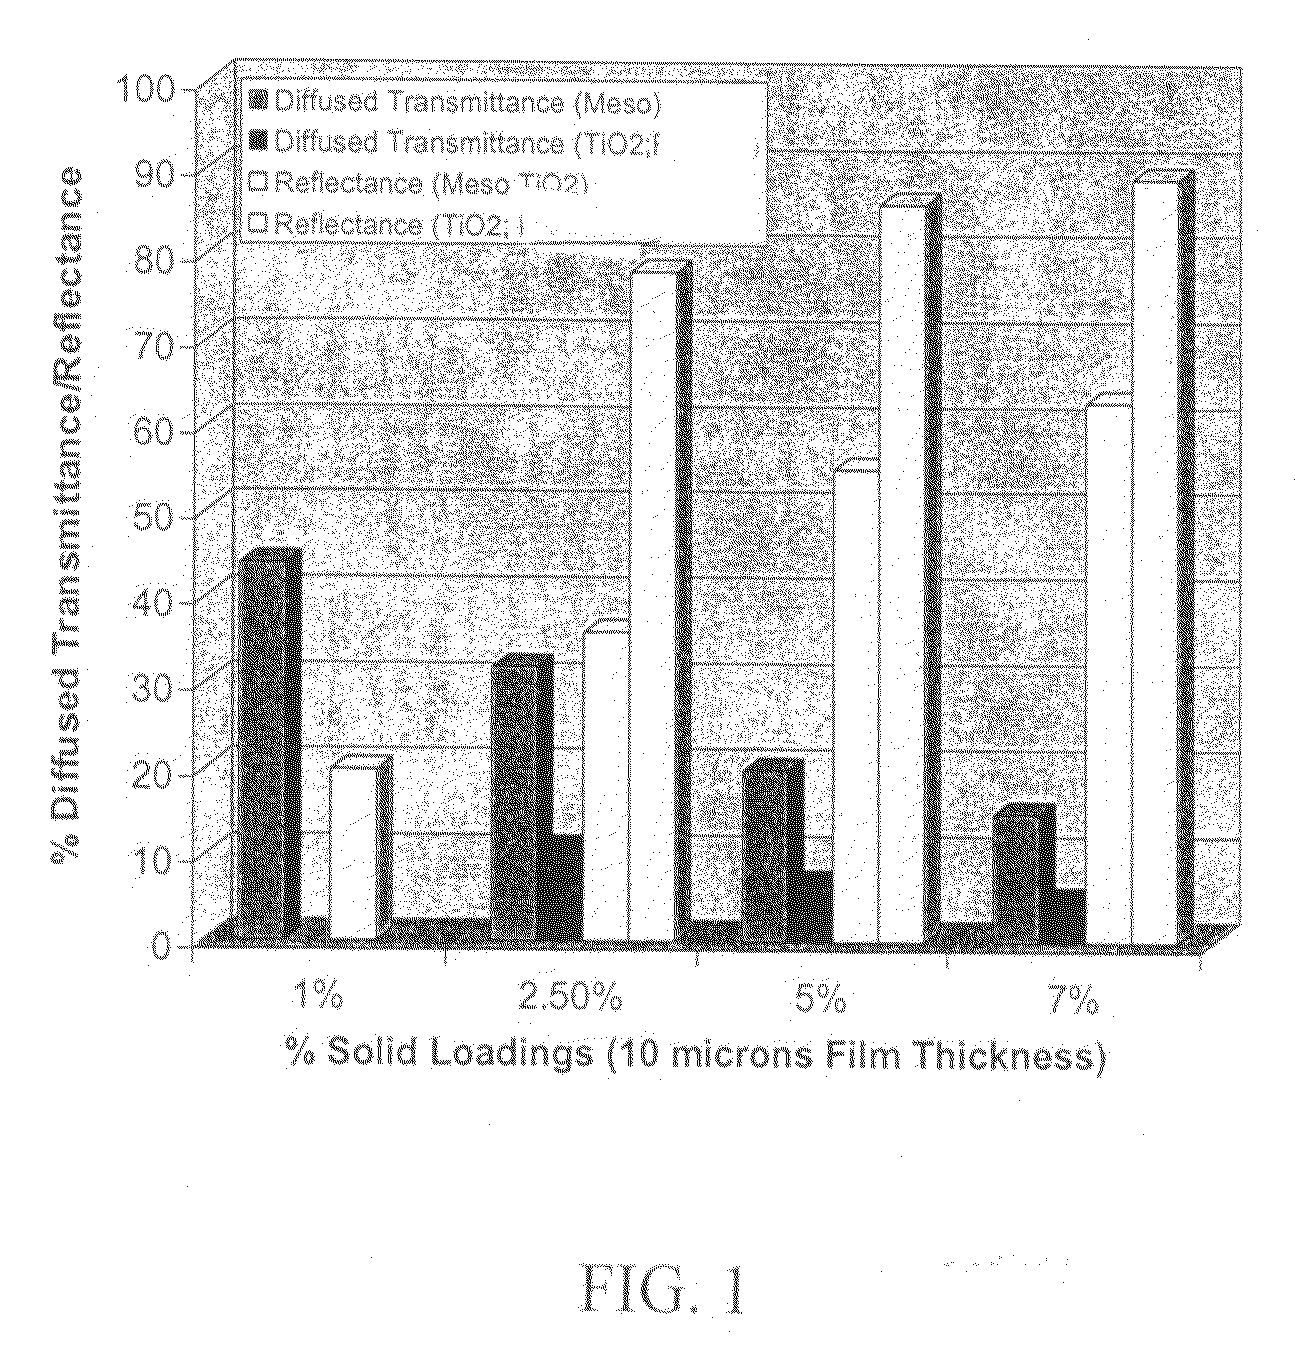 Mesoporous material compositions and methods of their use for improving the appearance of biological surfaces